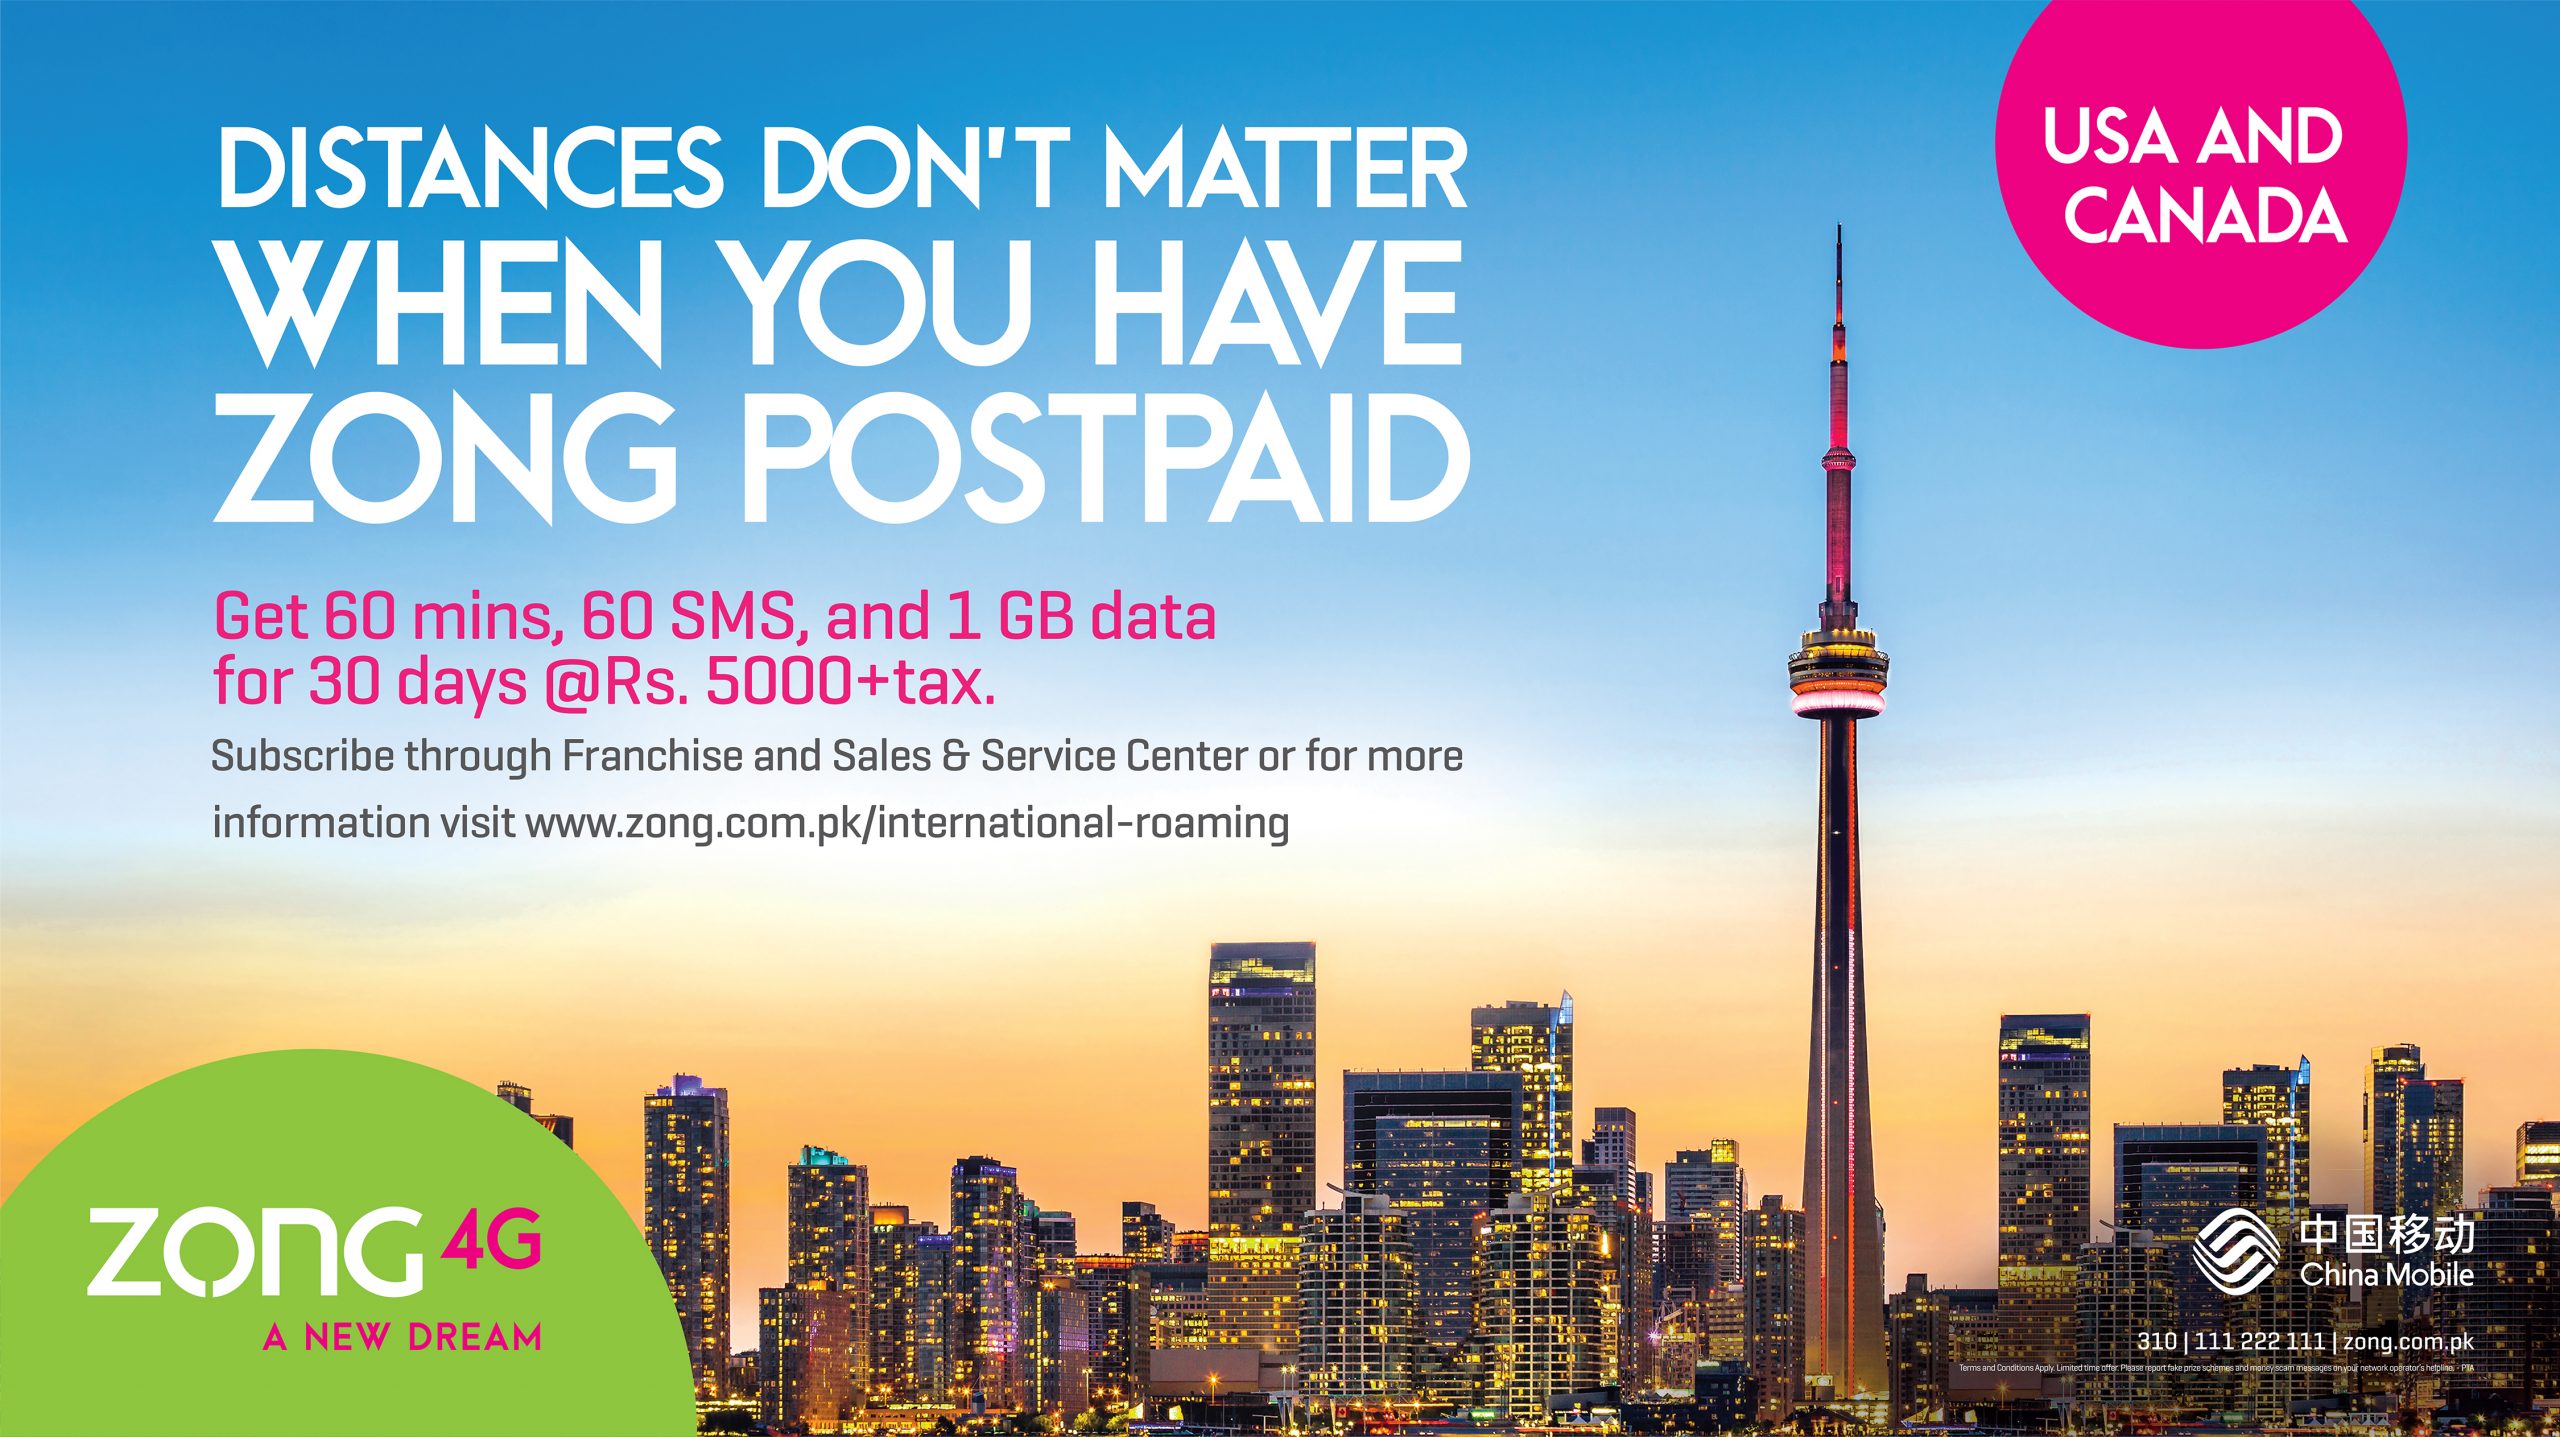 ZONG 4G offers the most Affordable roaming rates to USA & CANADA